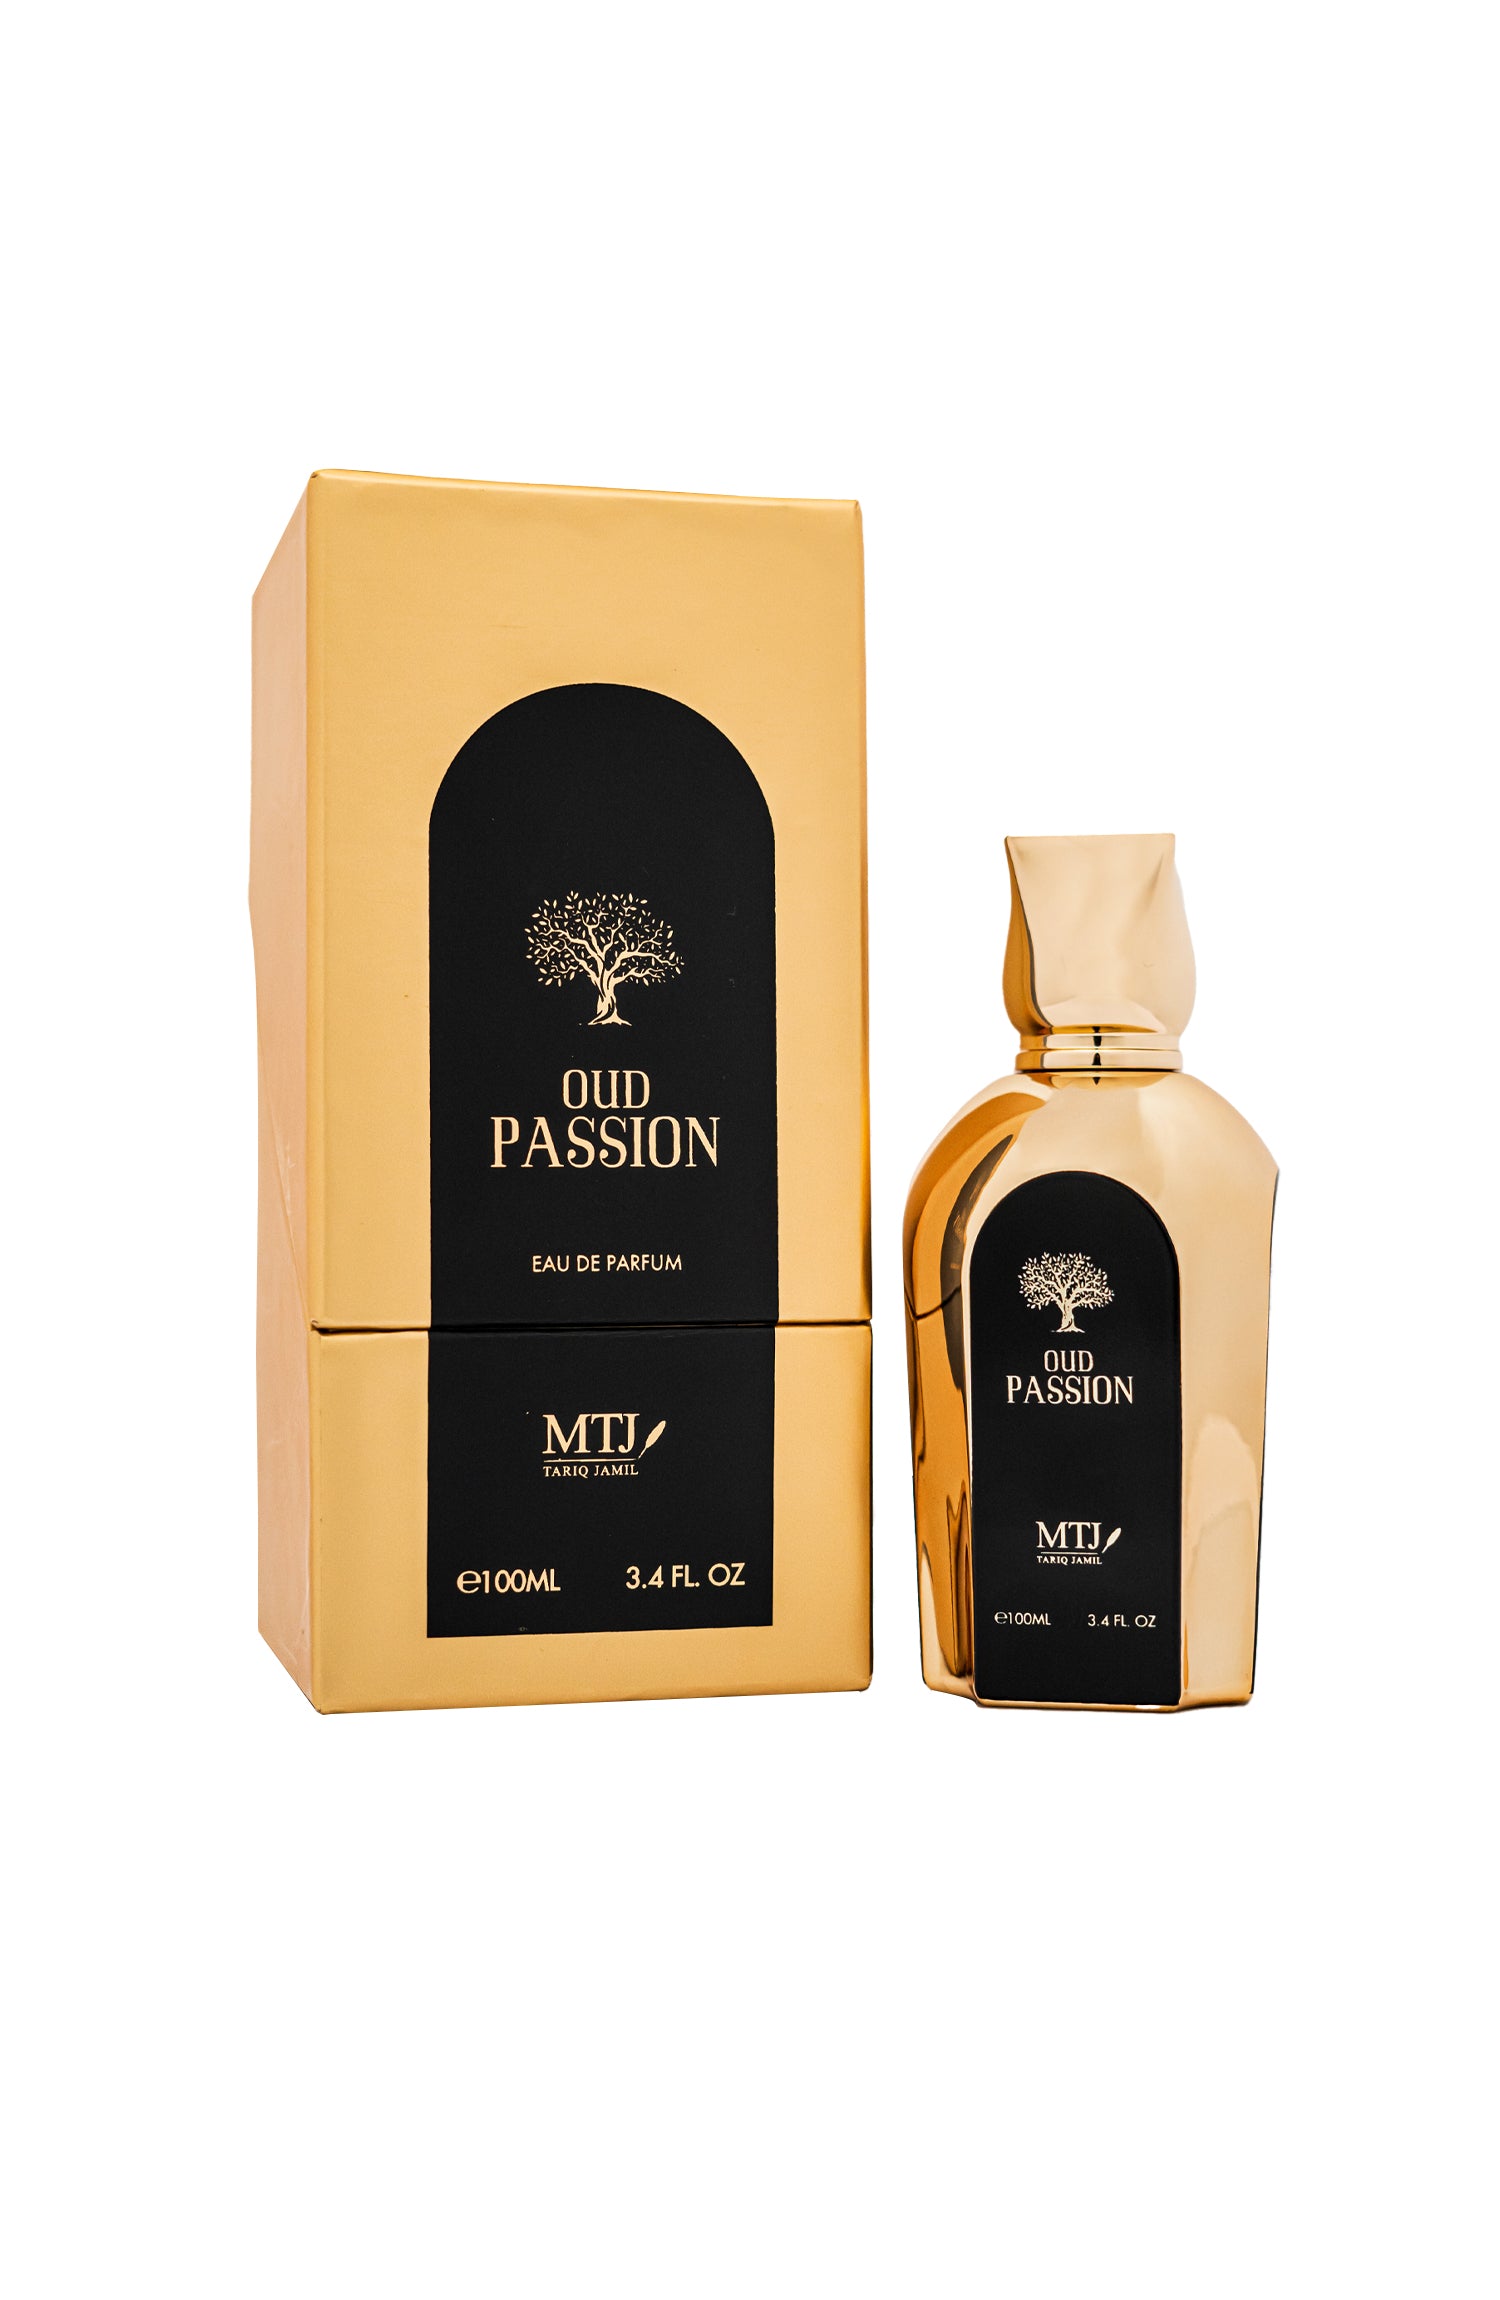 OUD PASSION